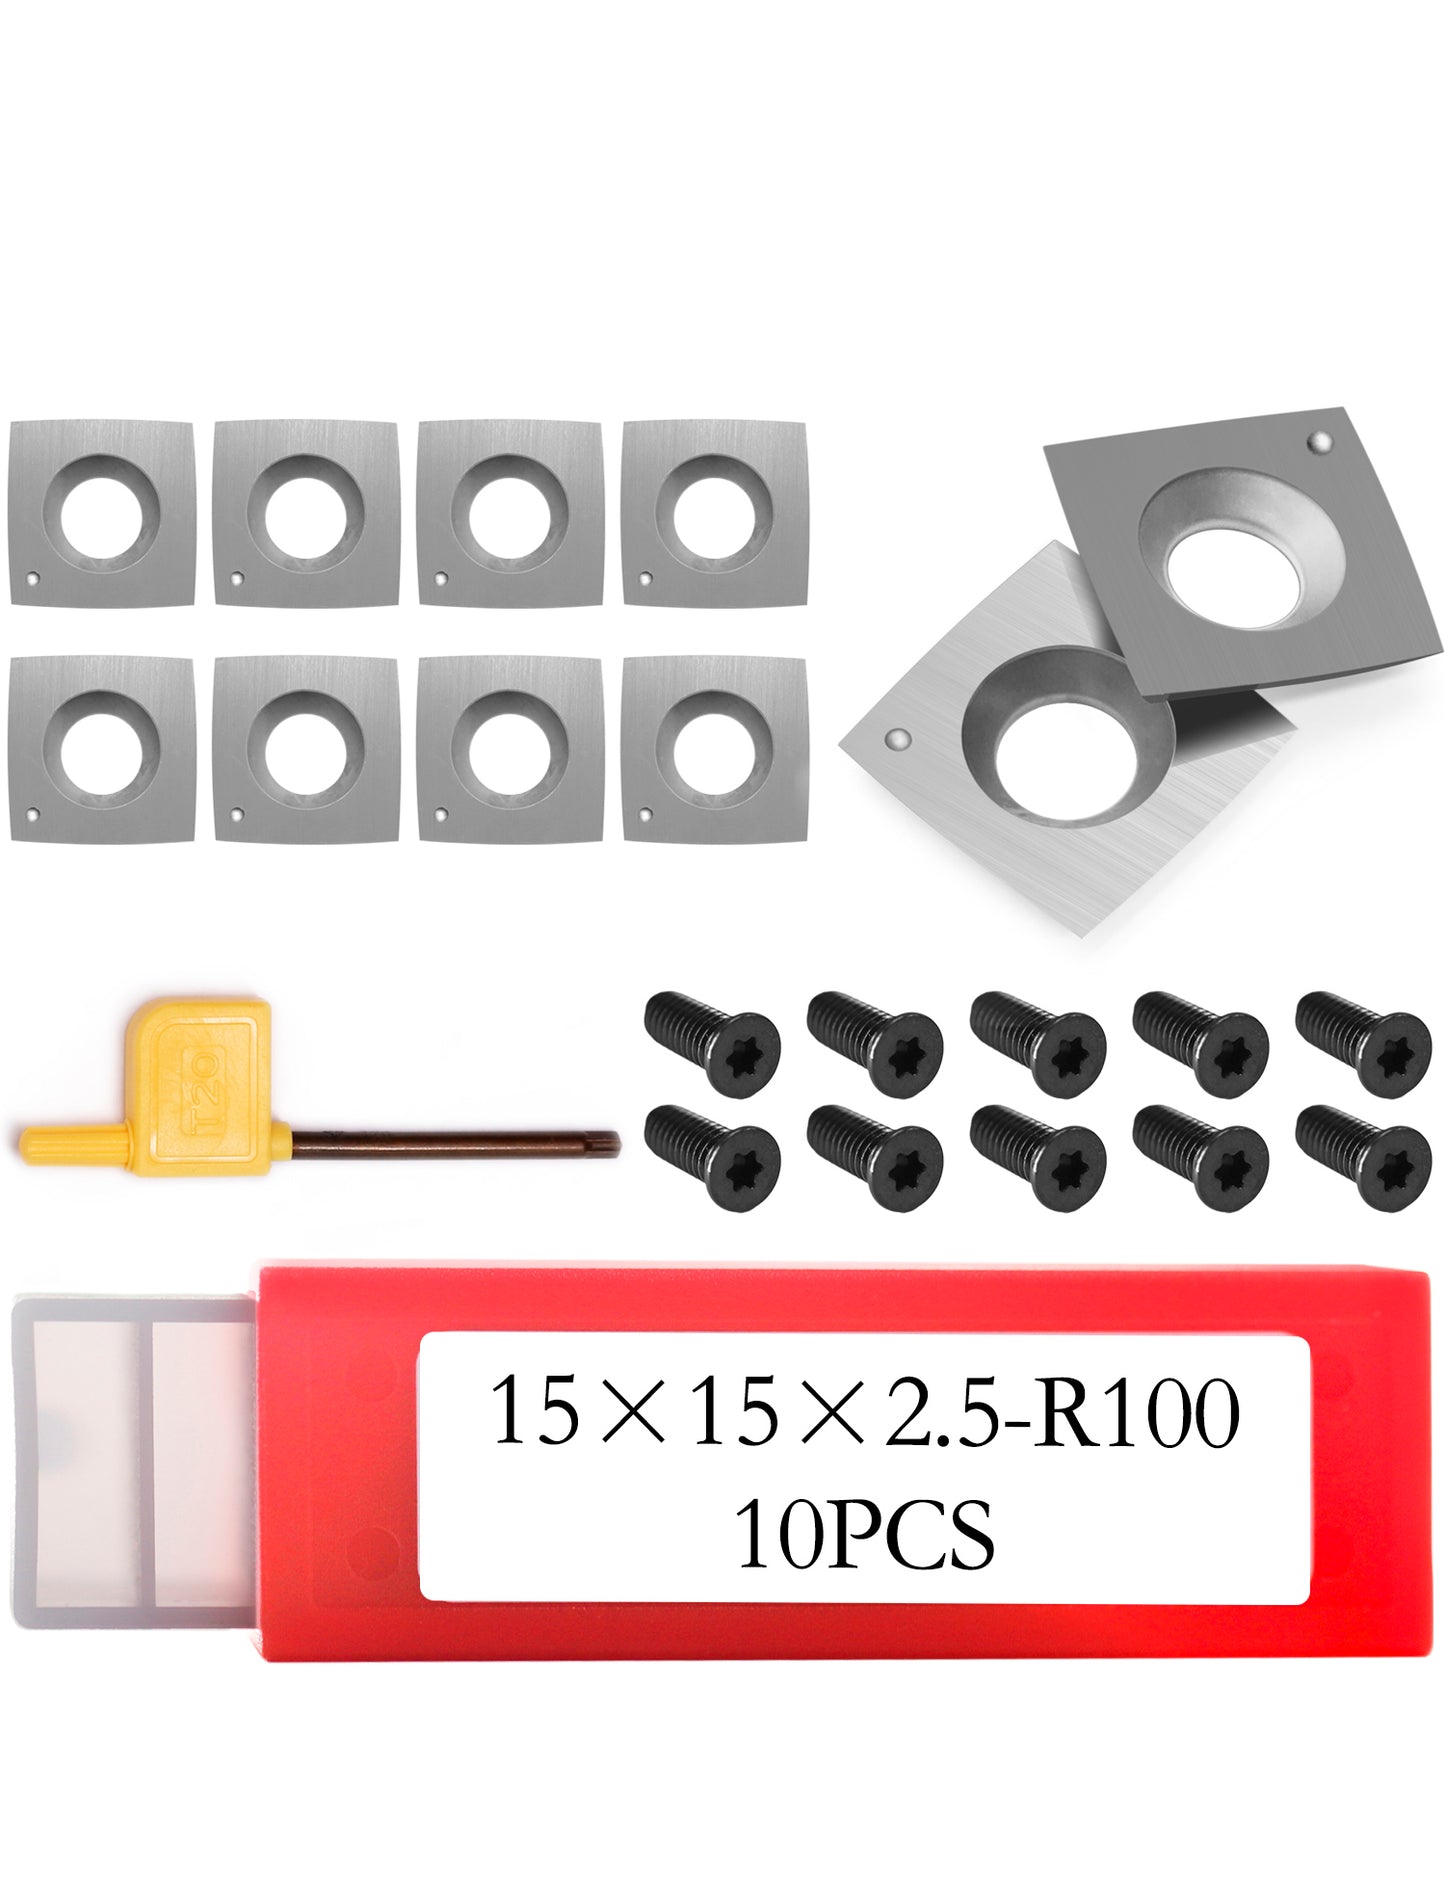 Woodworking 15x15x2.5mm-30°-R100 Square Tungsten Carbide Inserts Replacement Cutter Indexable Knife for Powermatic/ Jet/ Steelex /ShopFox/Craftex CXHEL & CX Planers Jointers Cutterblocks or Helical Spiral Cutterheads